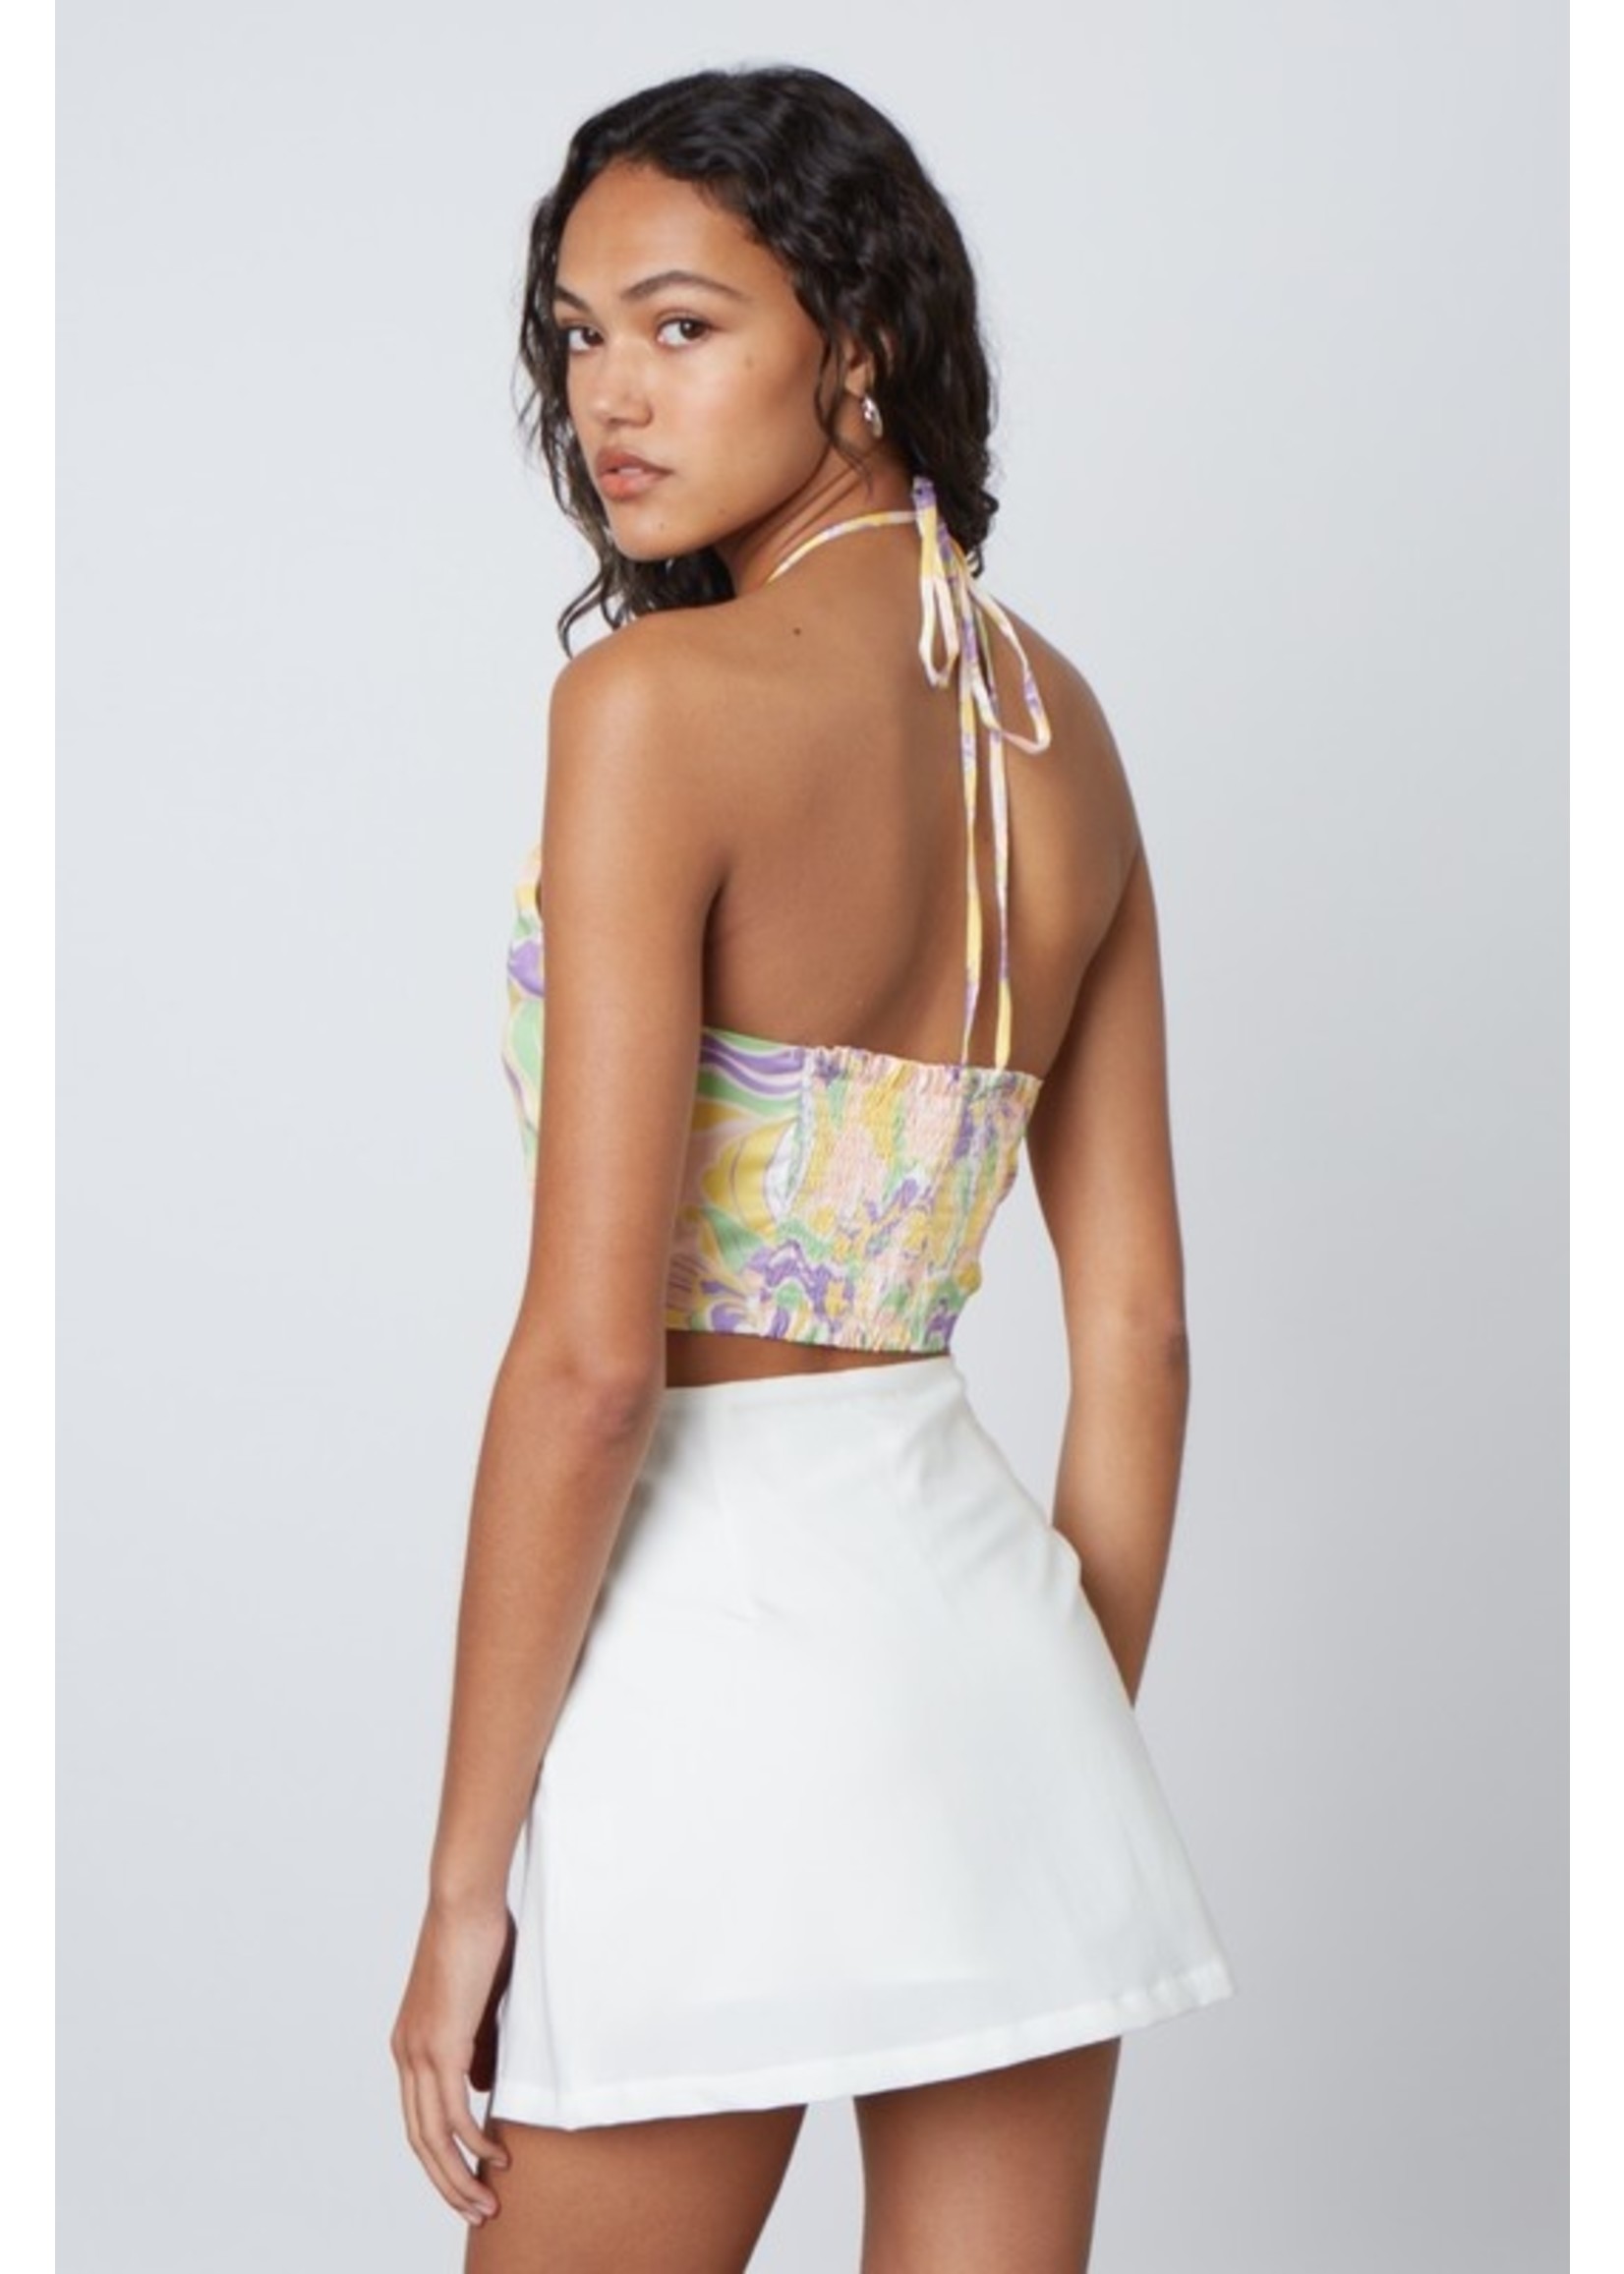 Cotton Candy LA Abstract Print Halter with Front Ruche Detailing - JT-175